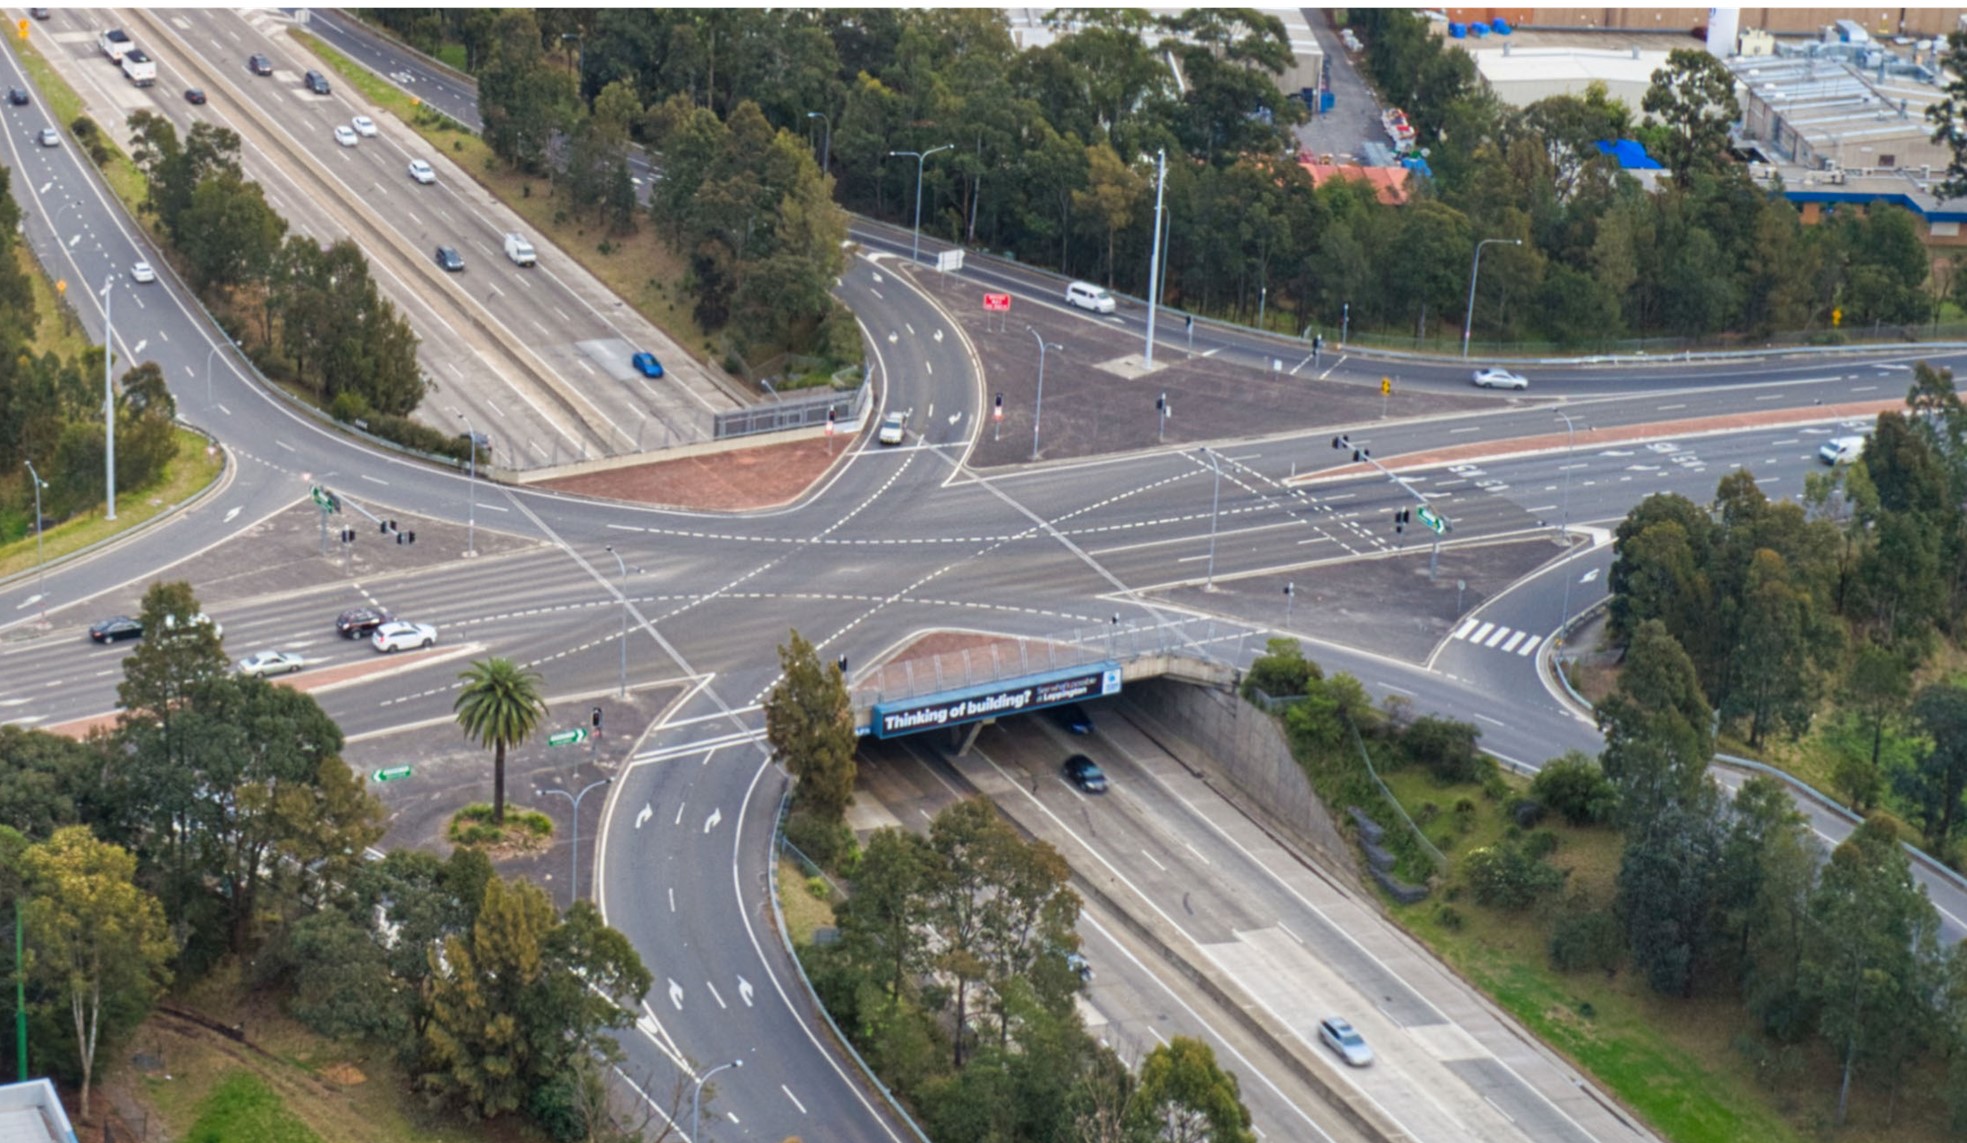 Traffic entering the M5 Motorway at Moorebank Avenue has to merge with traffic exiting the Hume Highway